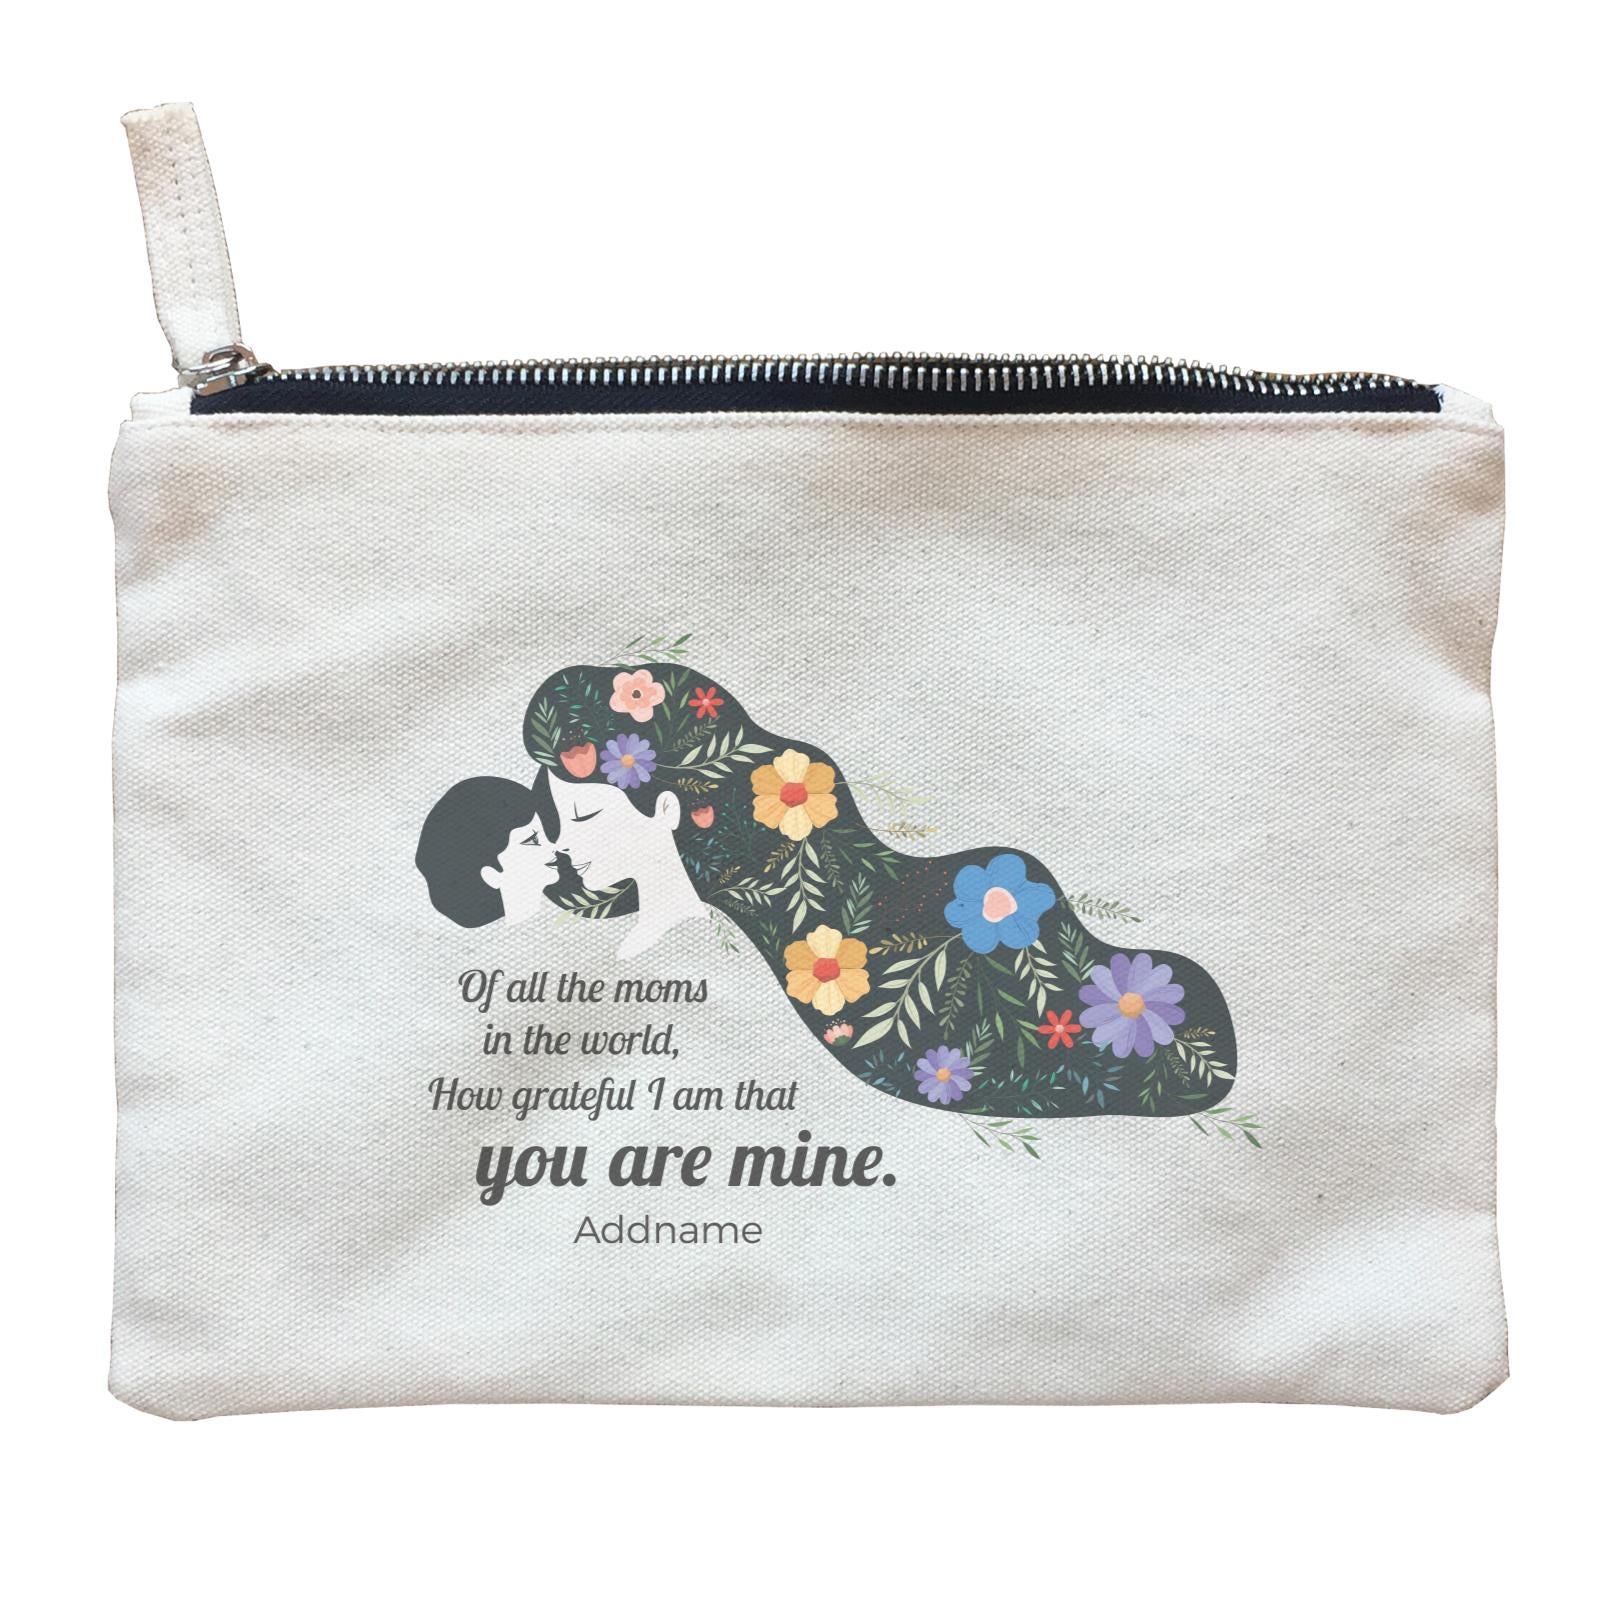 Sweet Mom Quotes 2 Of All The Moms In The World, How Grateful I Am That You Are Mine Addname Accessories Zipper Pouch